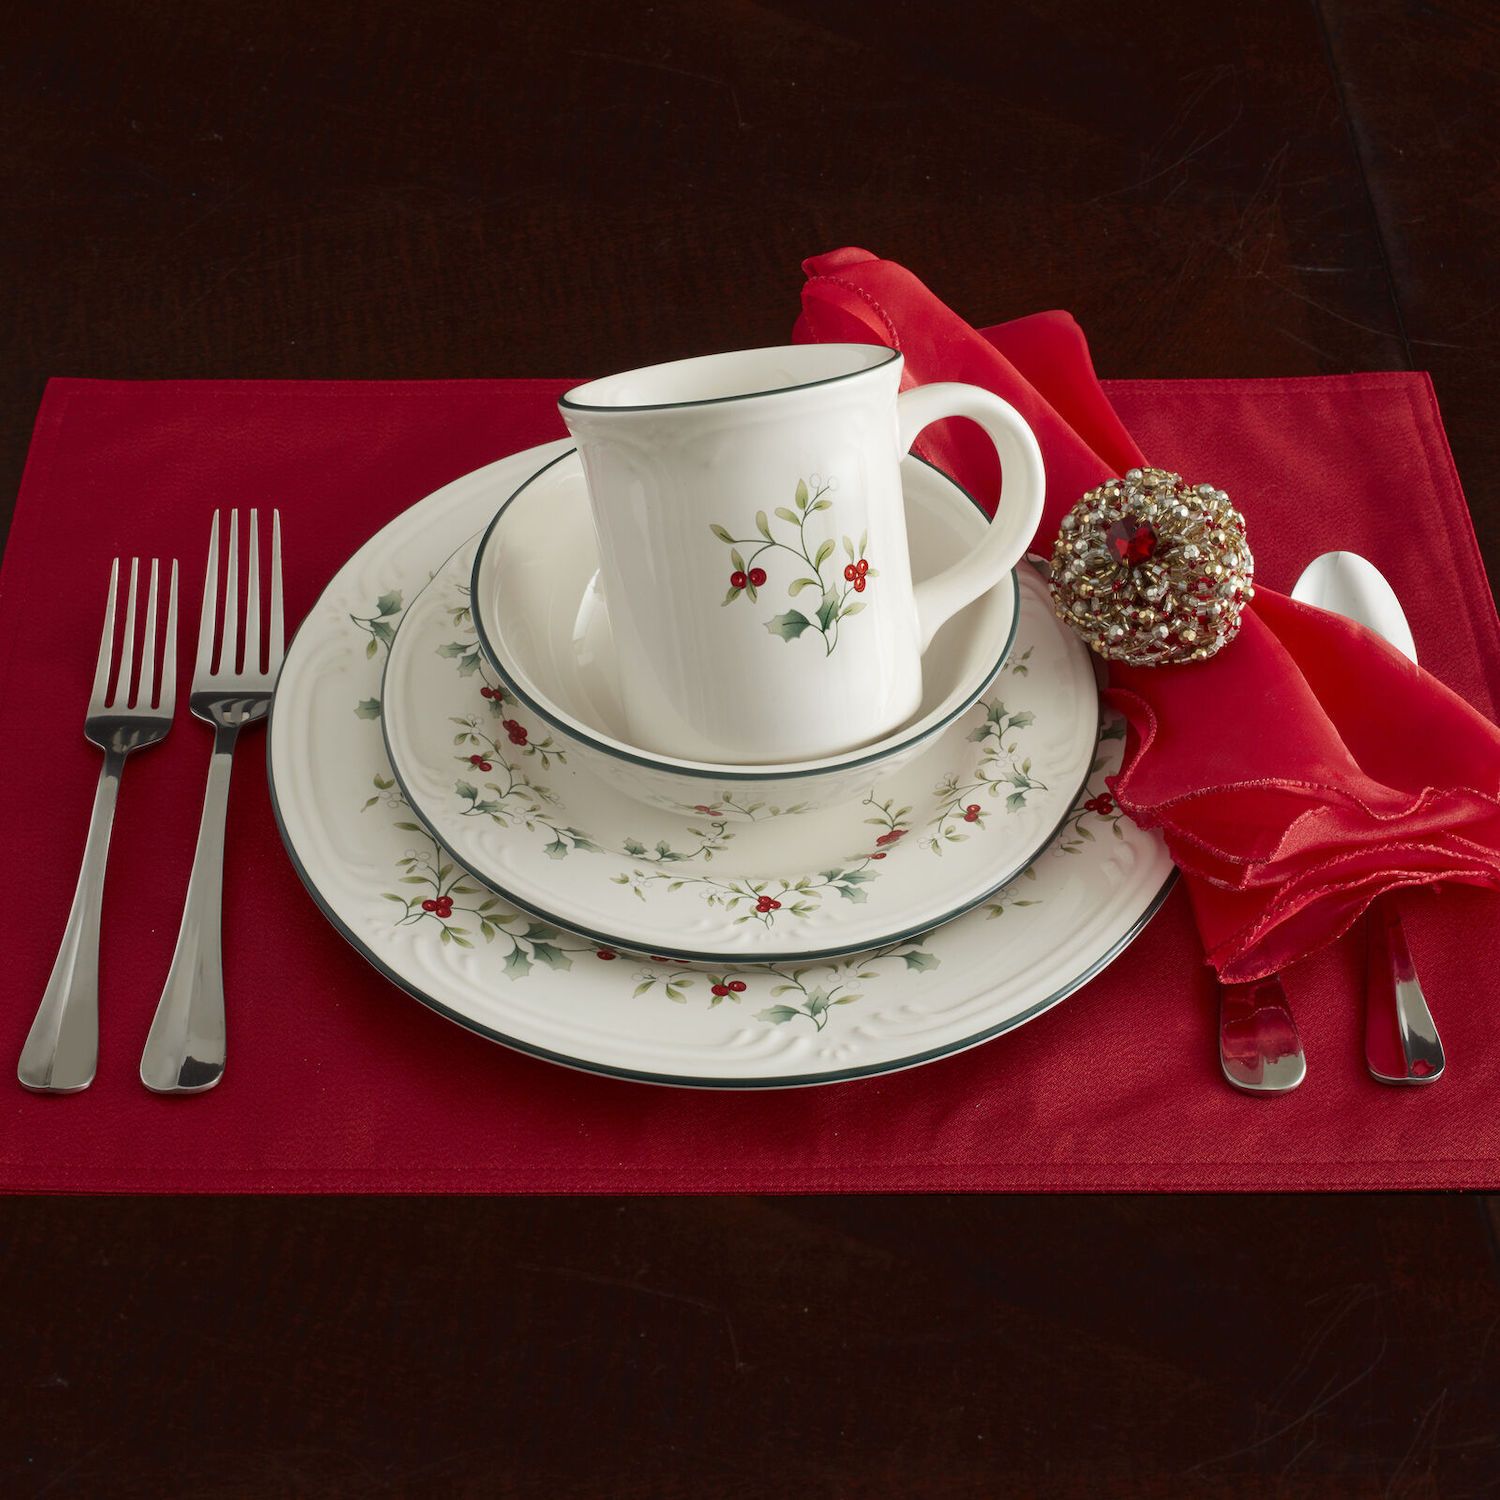 Festive dinnerware is a must for any holiday dinner.